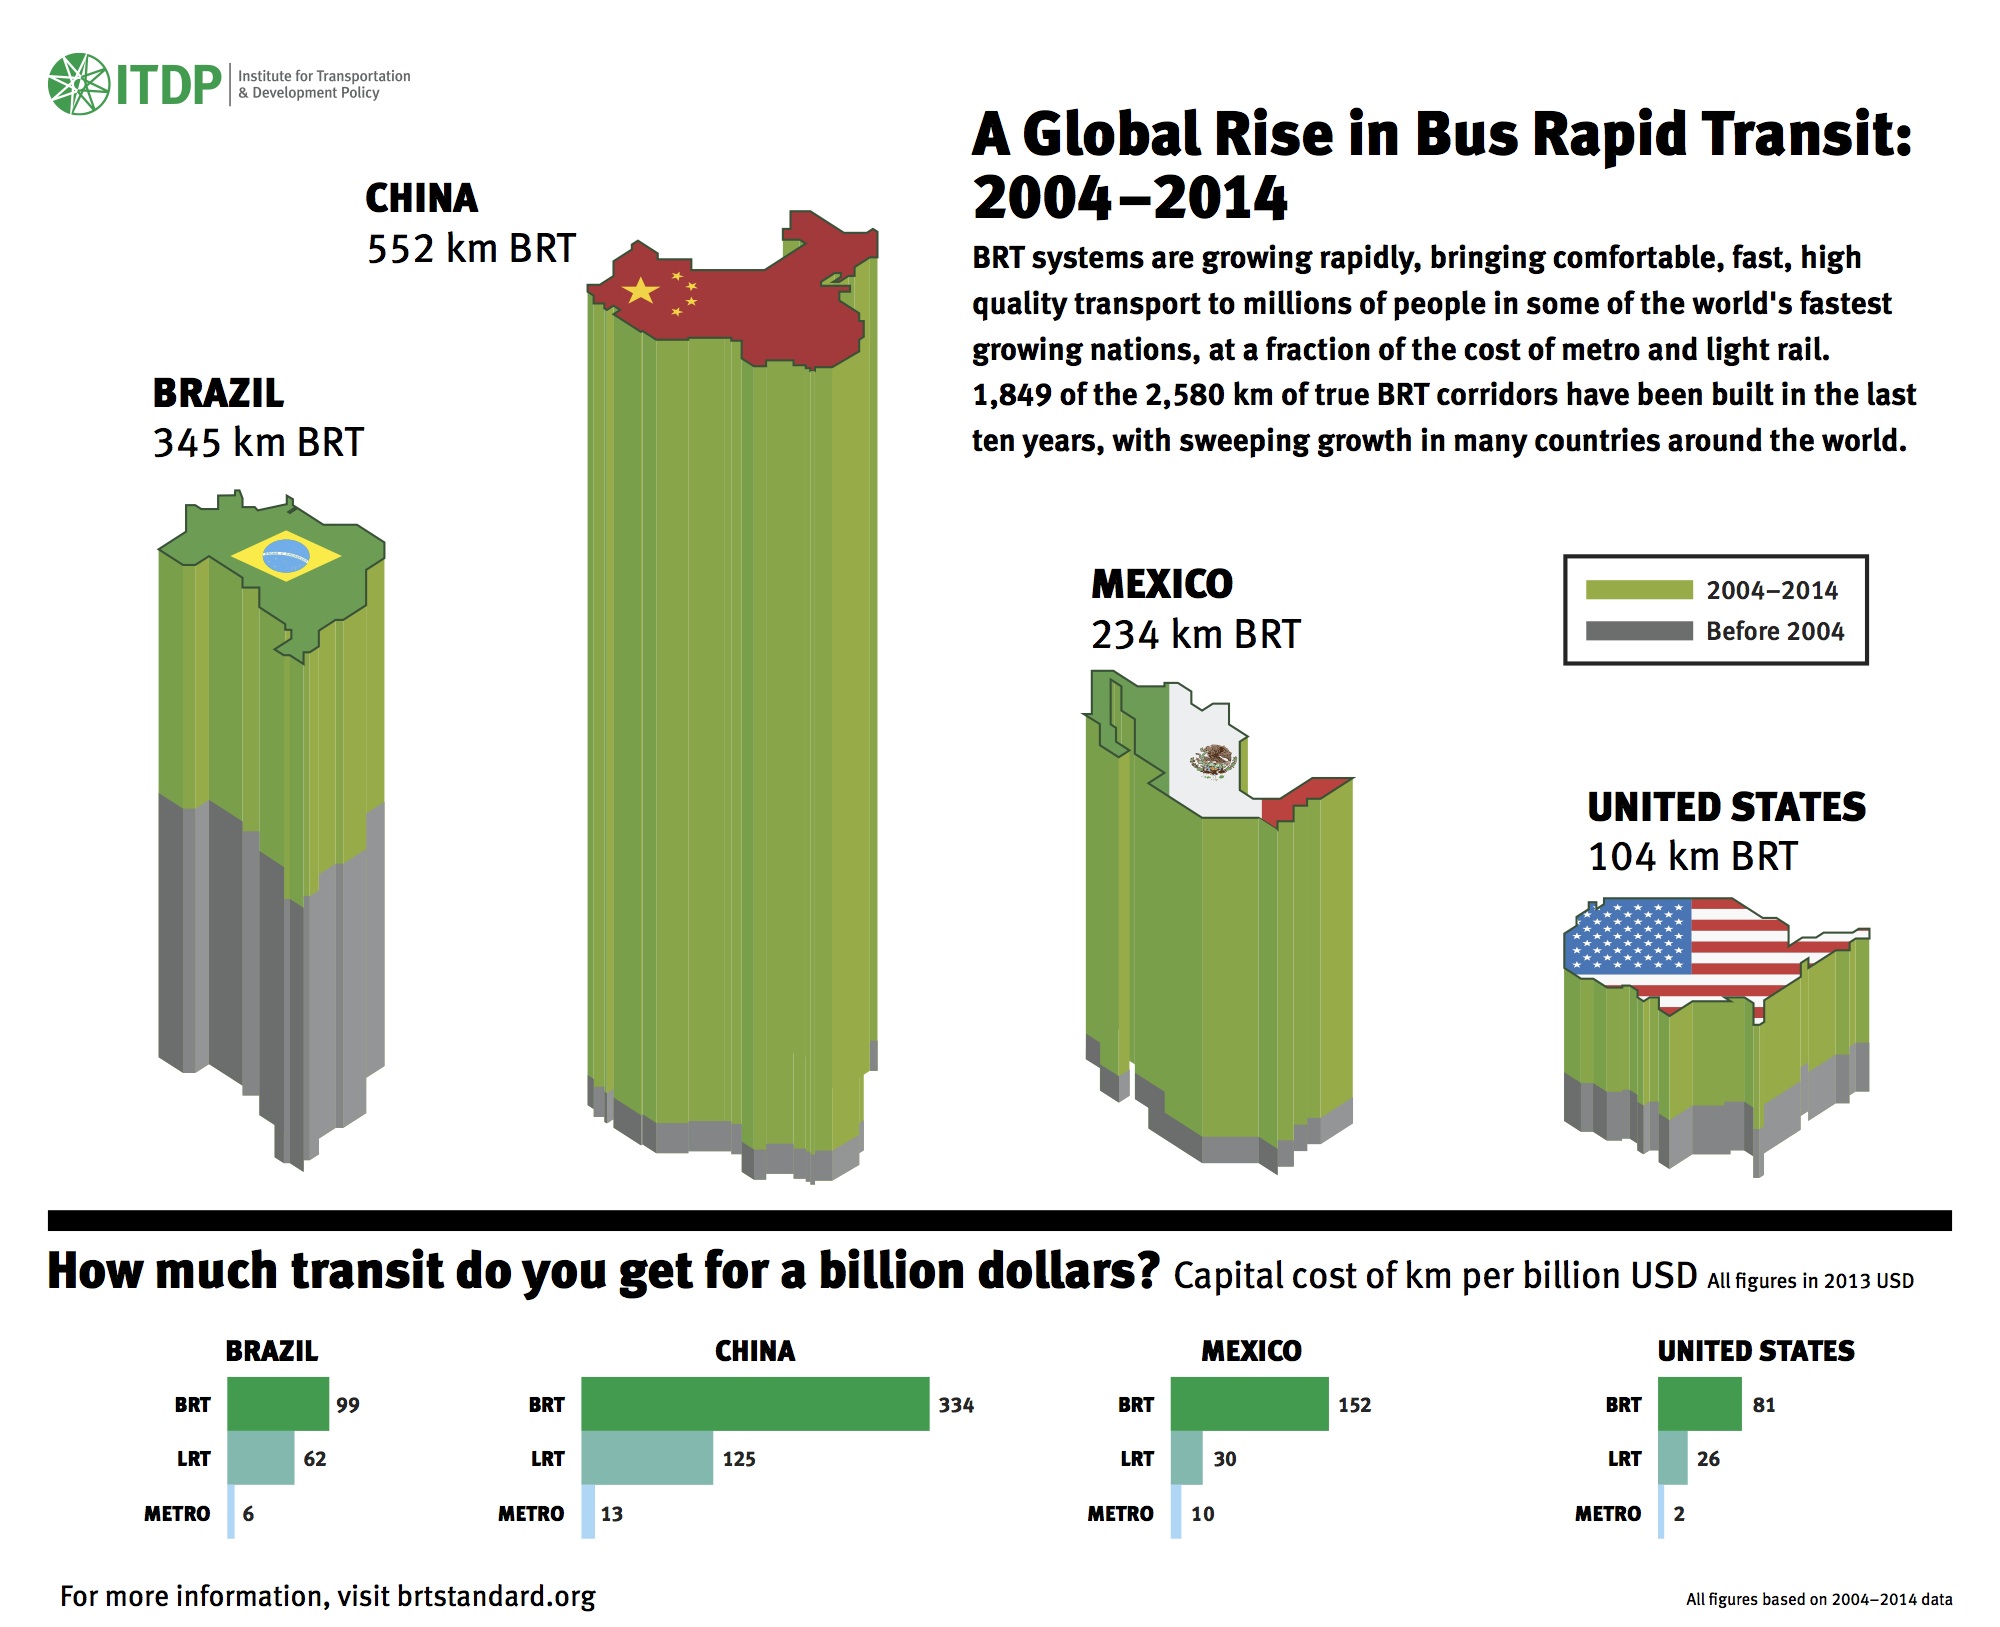 From 2004-2014, BRT systems grew rapidly, mostly fueled by growth in China, Brazil, Mexico, and the US.